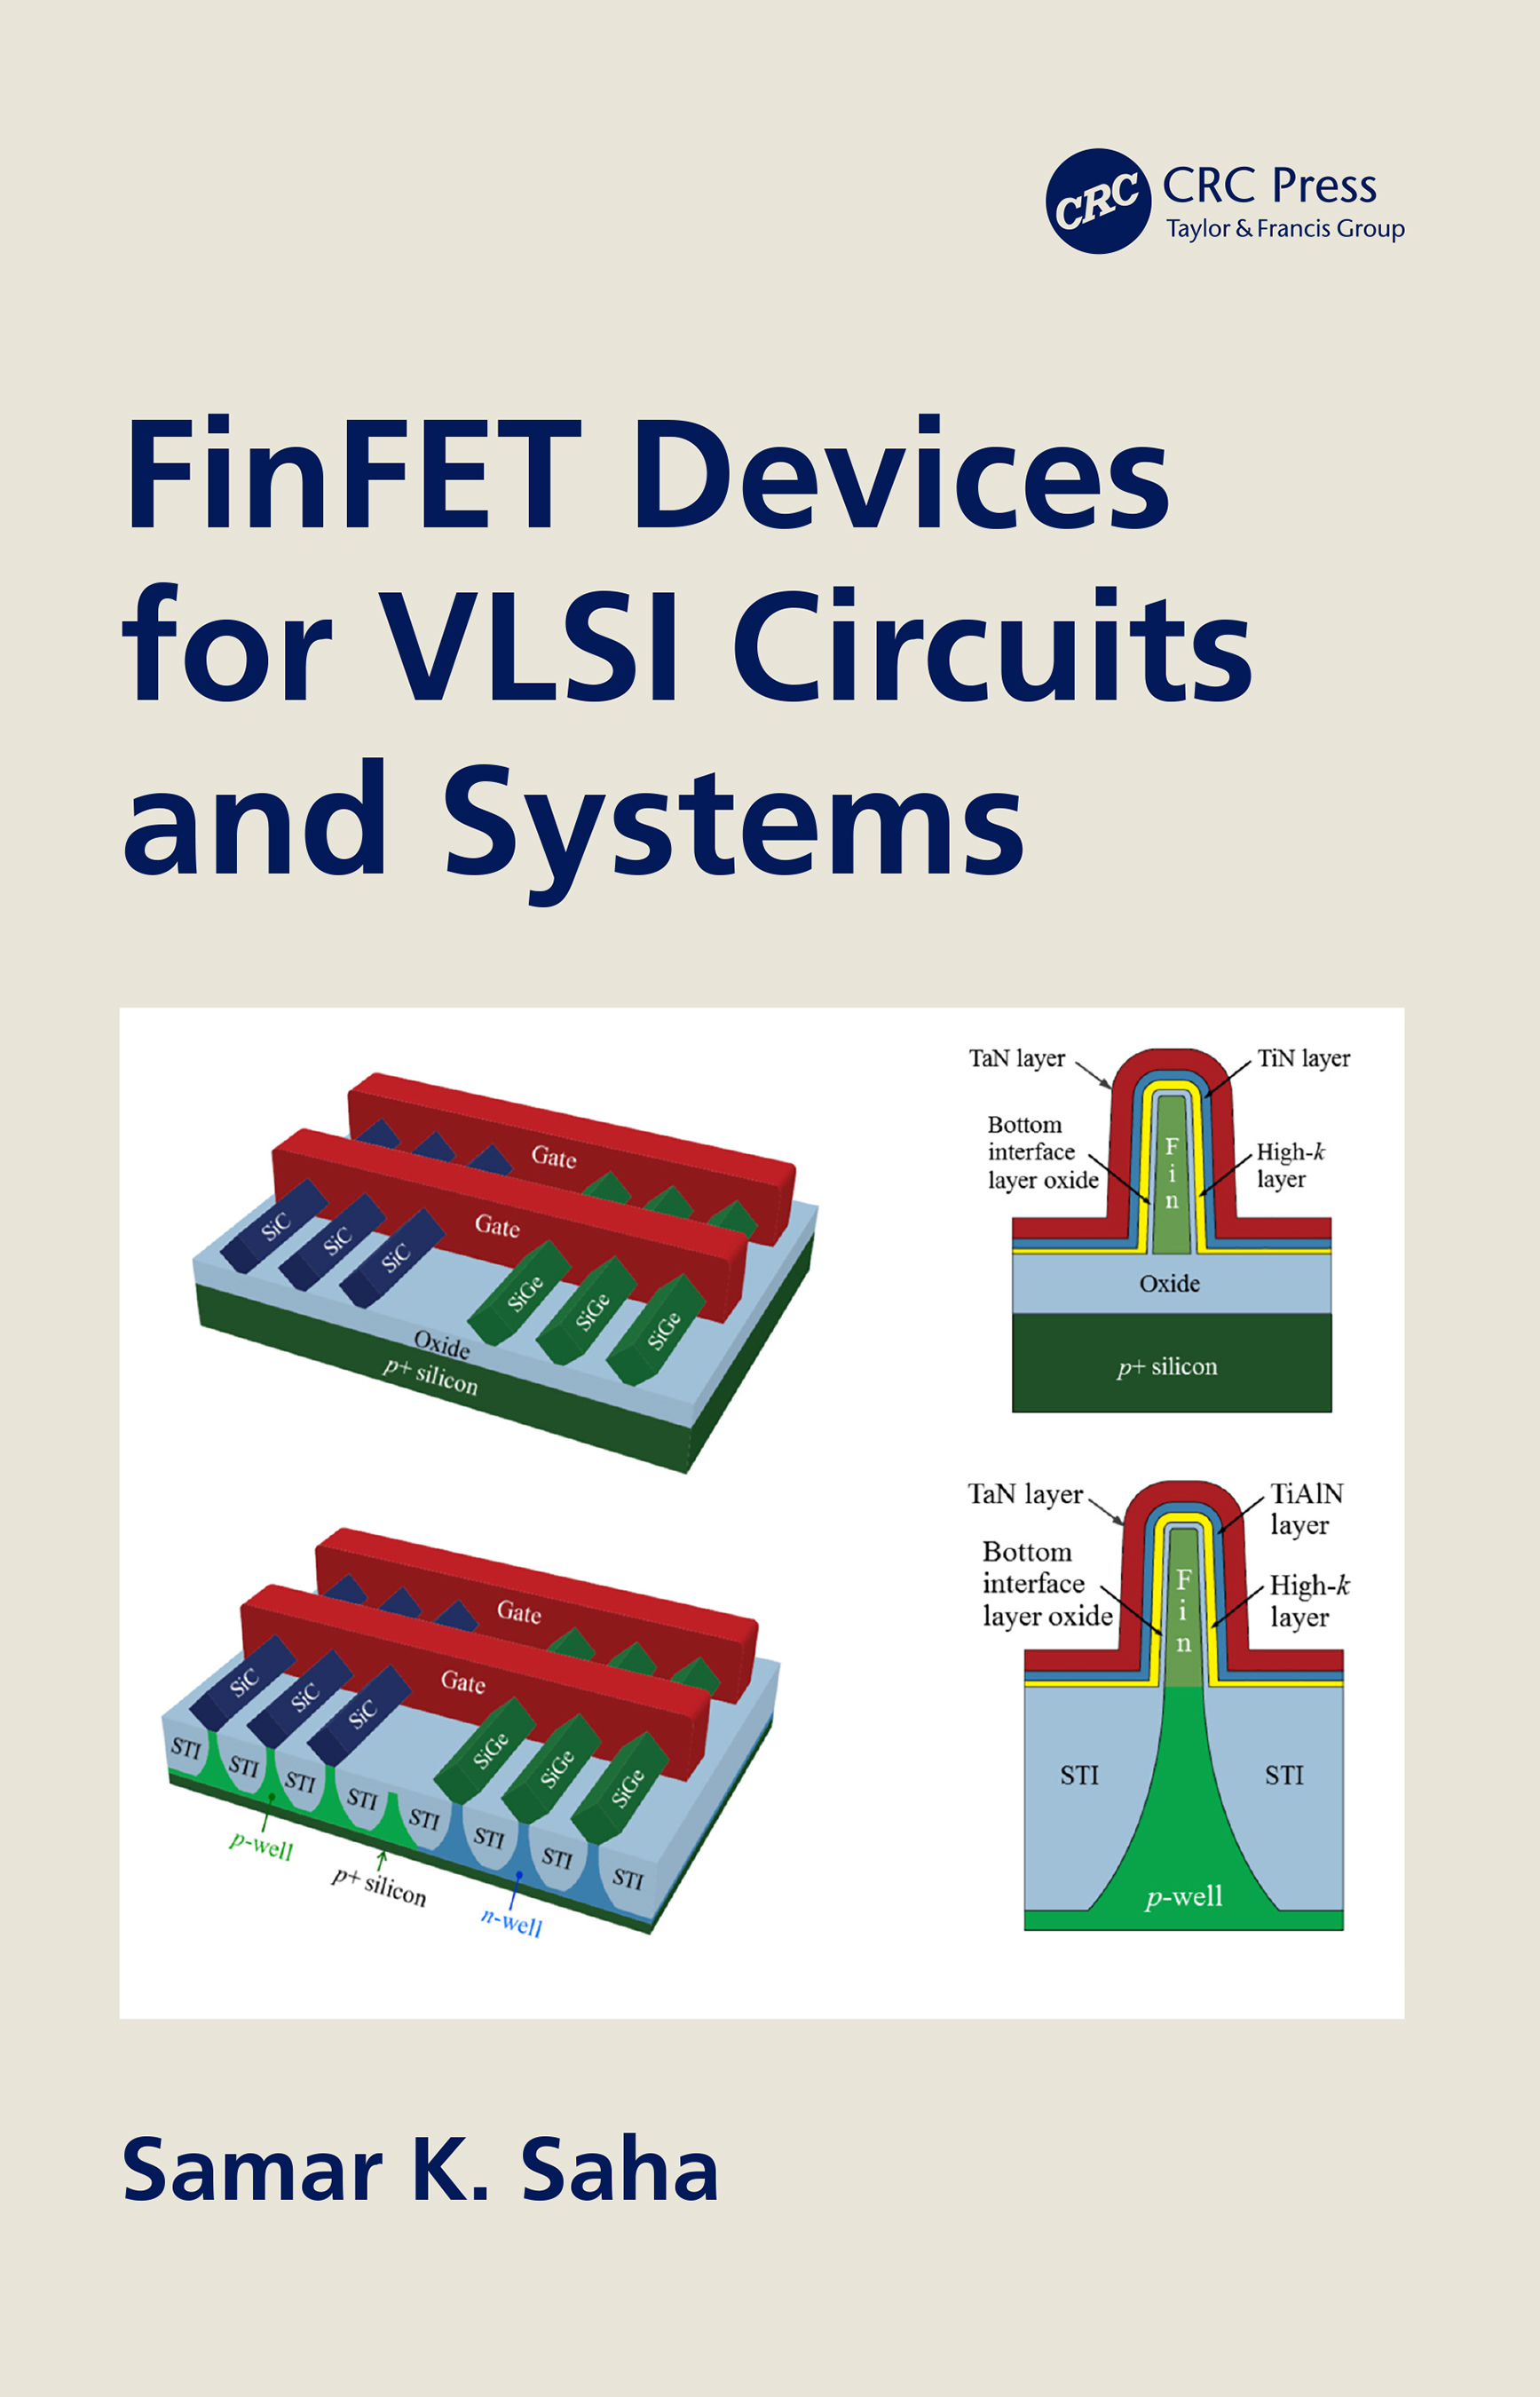 9780429504839-FinFET Devices for VLSI Circuits and Systems.jpg